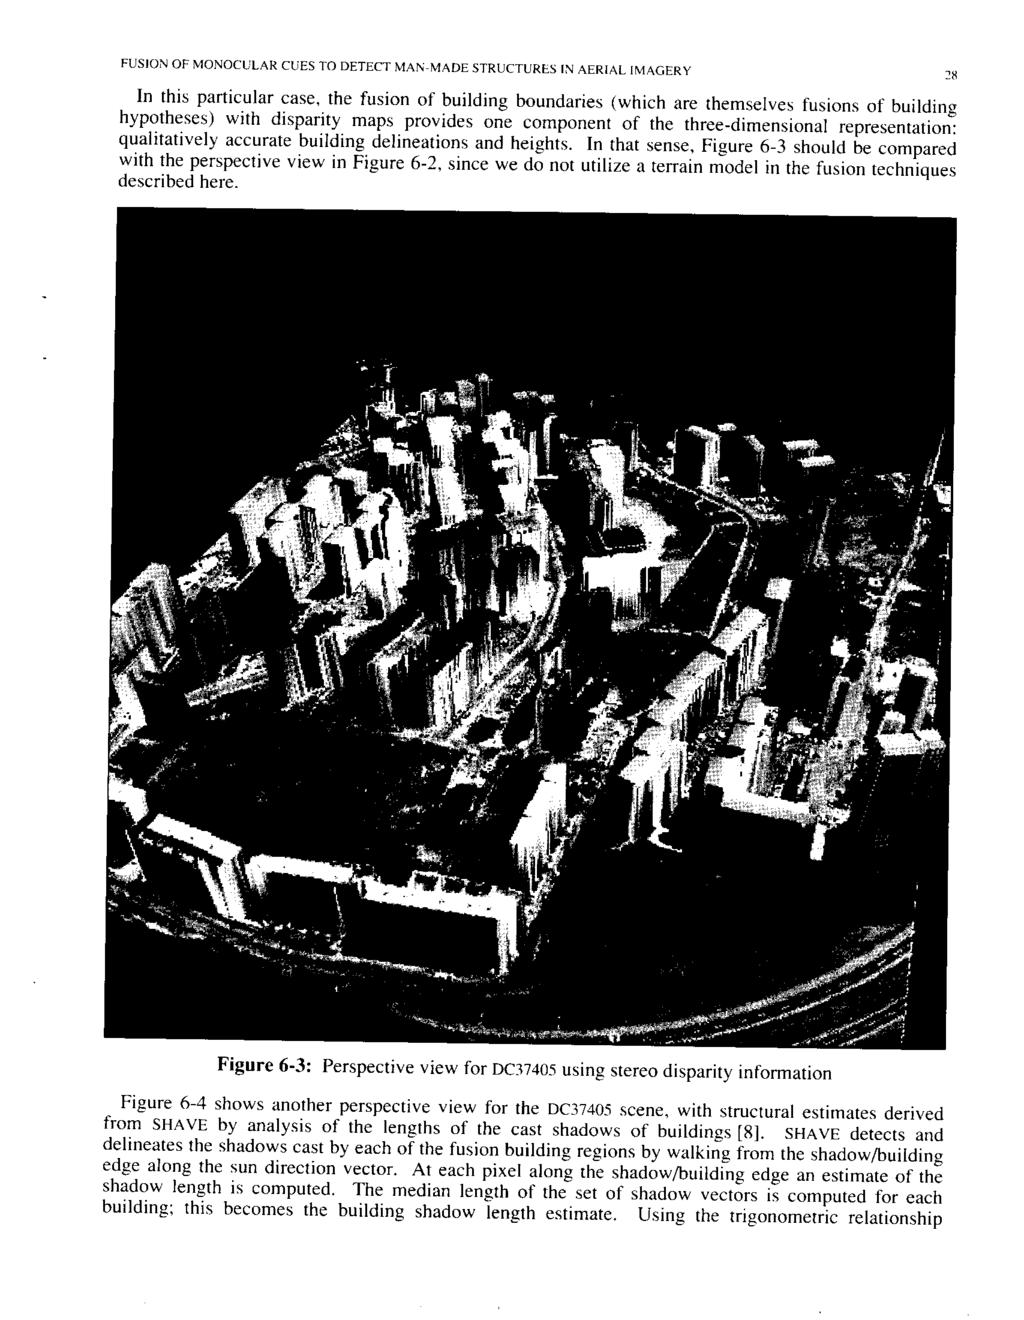 FUSION OF MONOCULAR CUES TO DETECT MAN-MADE STRUCTURES IN AERIAL IMAGERY 28 In this particular case, the fusion of building boundaries (which are themselves fusions of building hypotheses) with